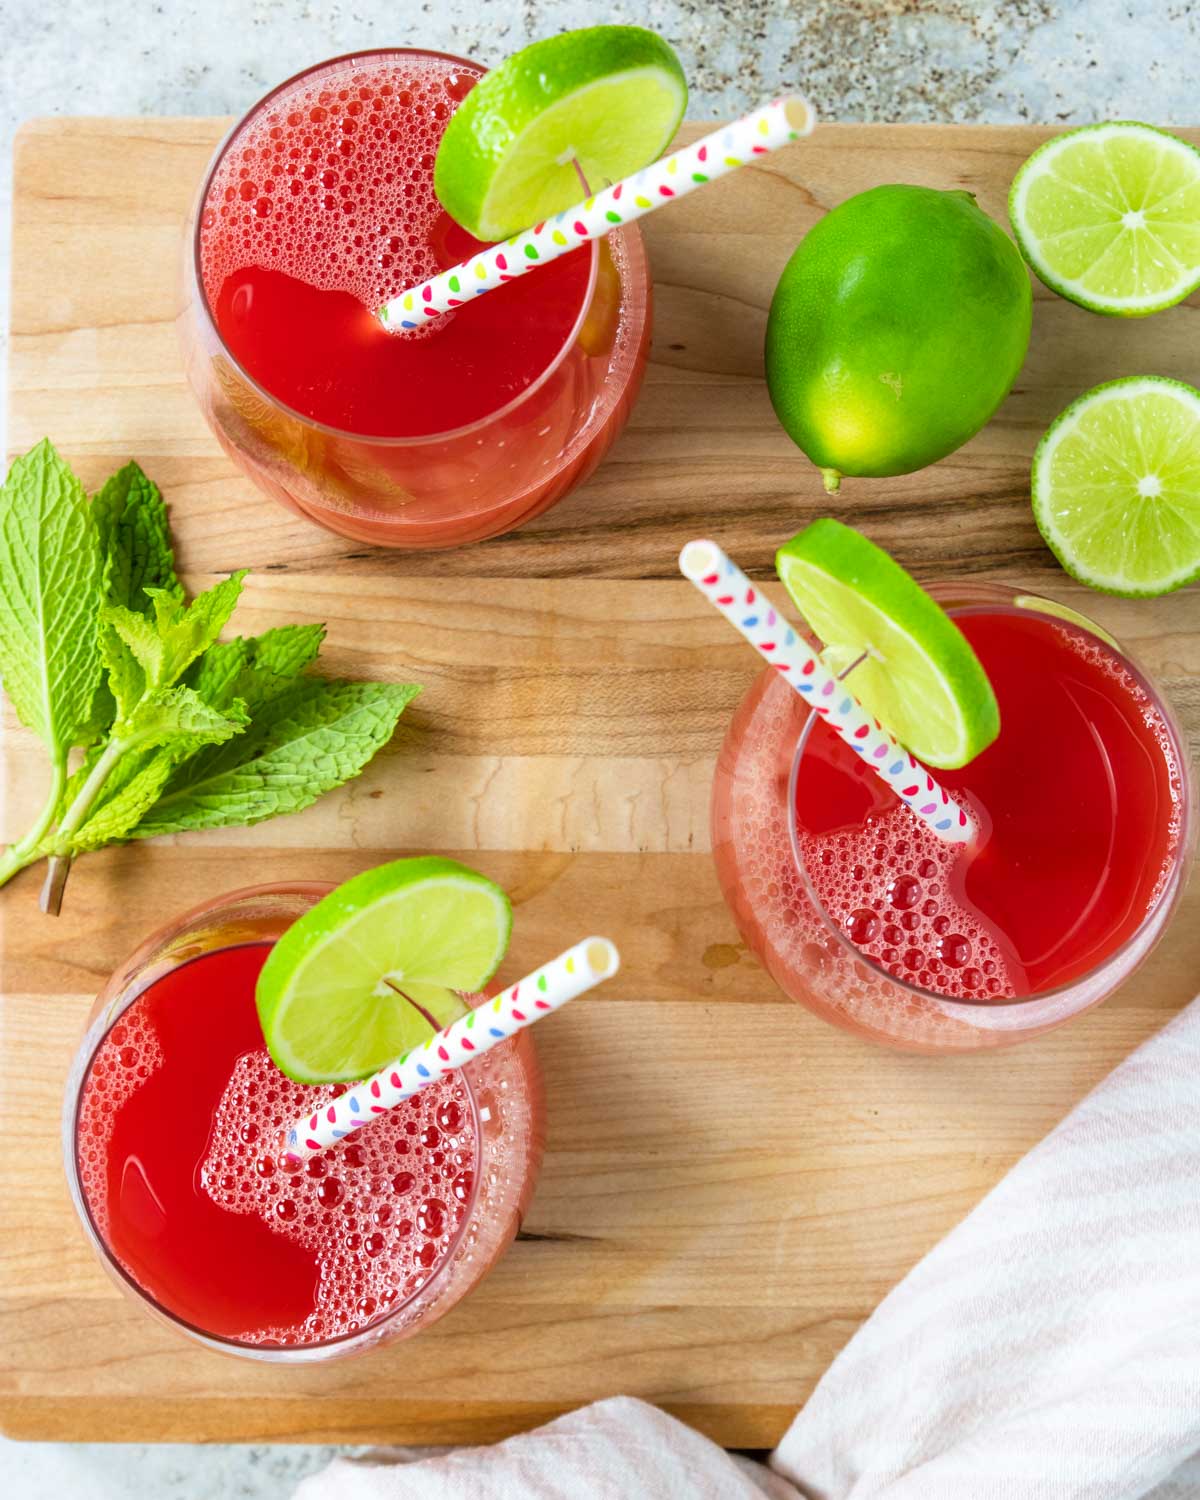 three glasses of watermelon juice from above garnished with limes